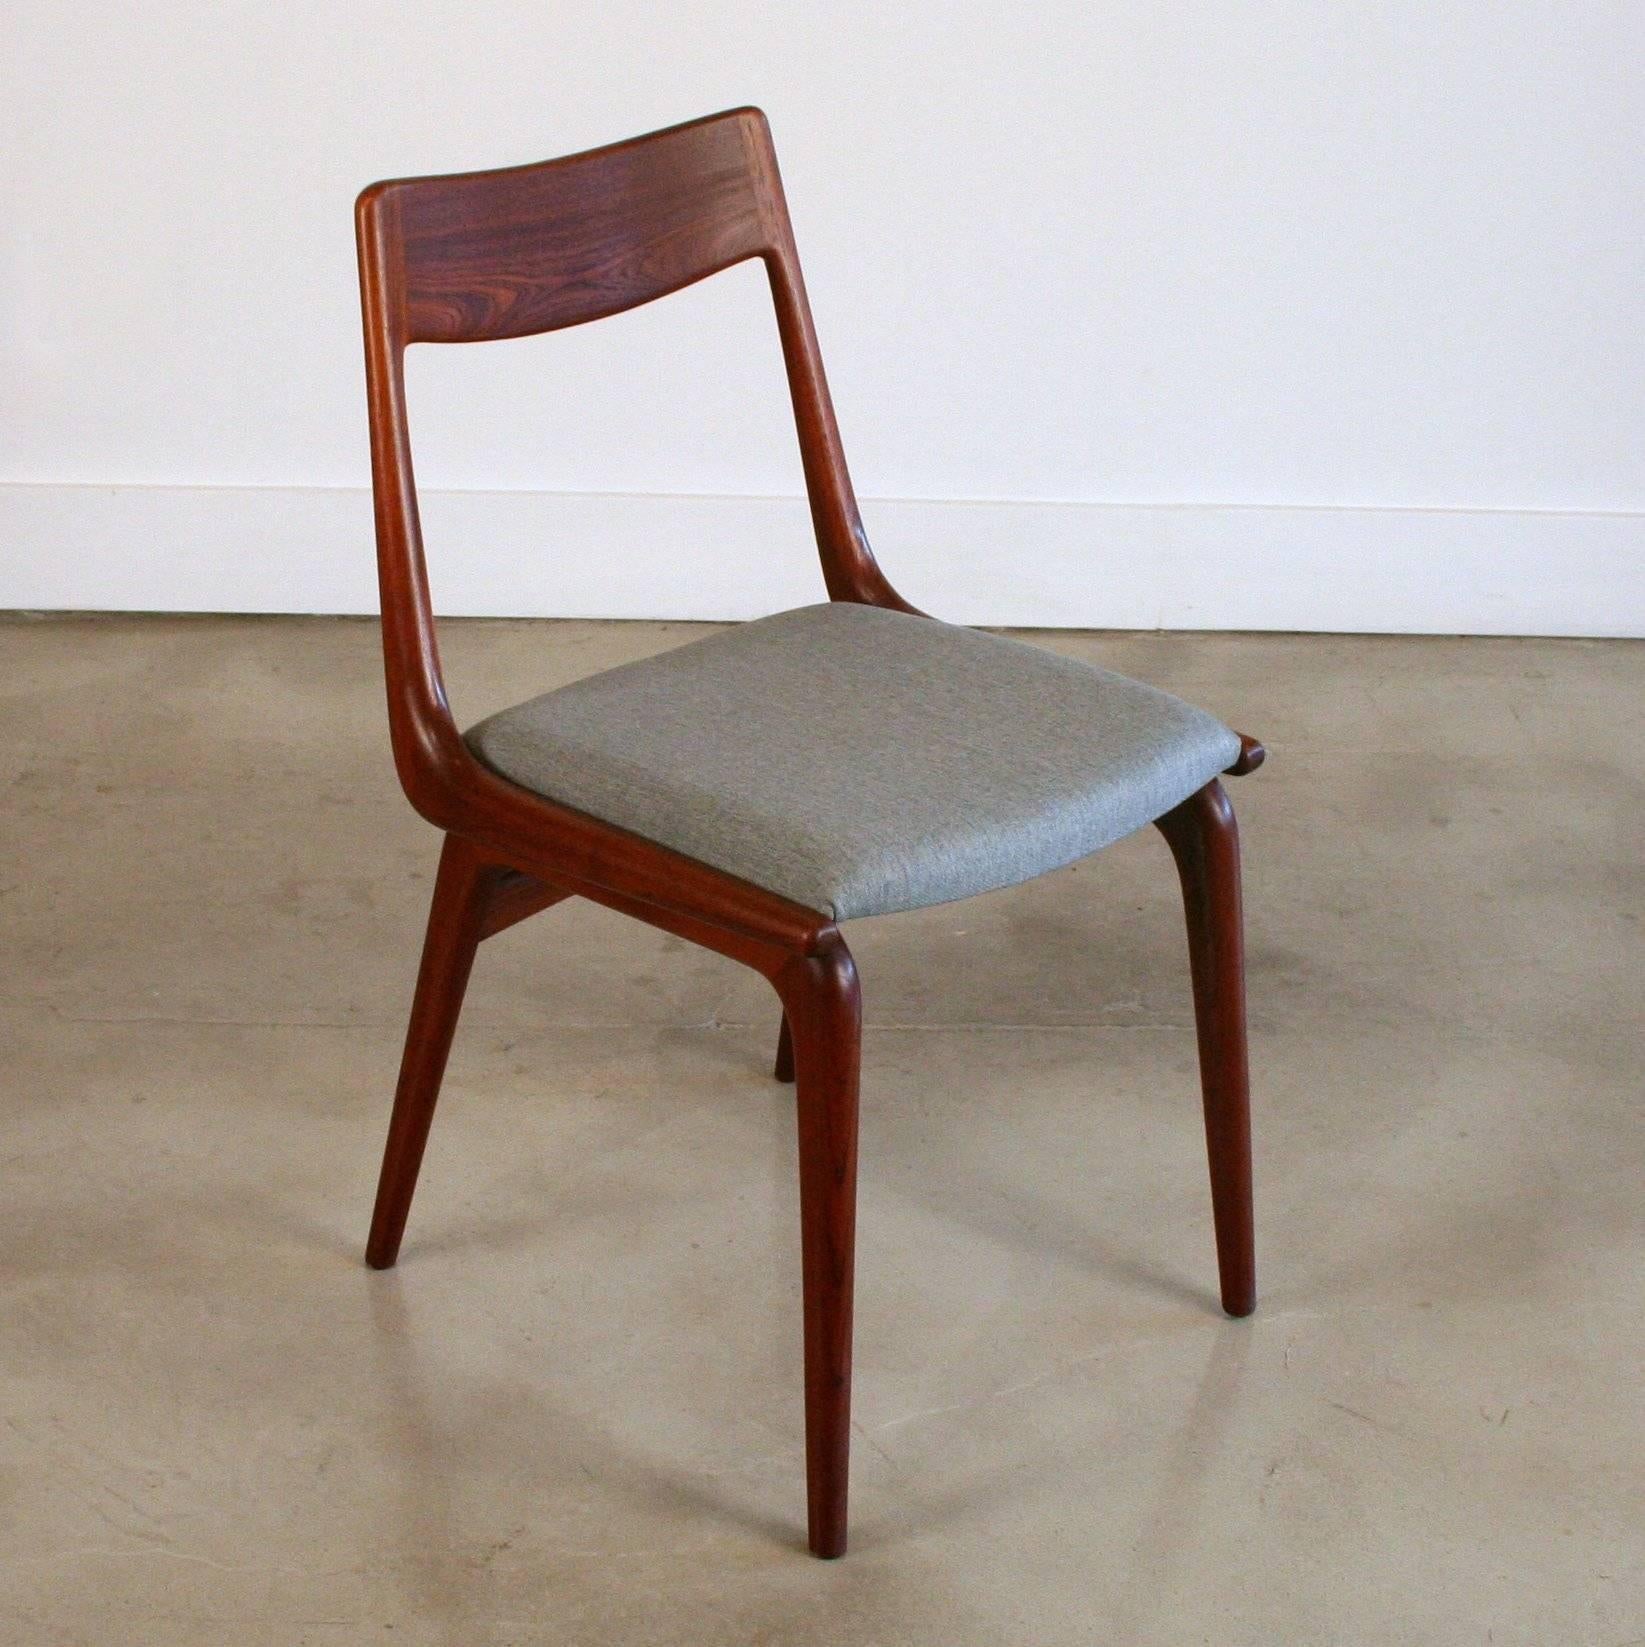 The forever popular Mid-Century Danish modern "Boomerang" dining chair, crafted from solid teak and newly re-covered in a light grey fabric. 12 available, sold individually. Made in Denmark, circa 1950s.